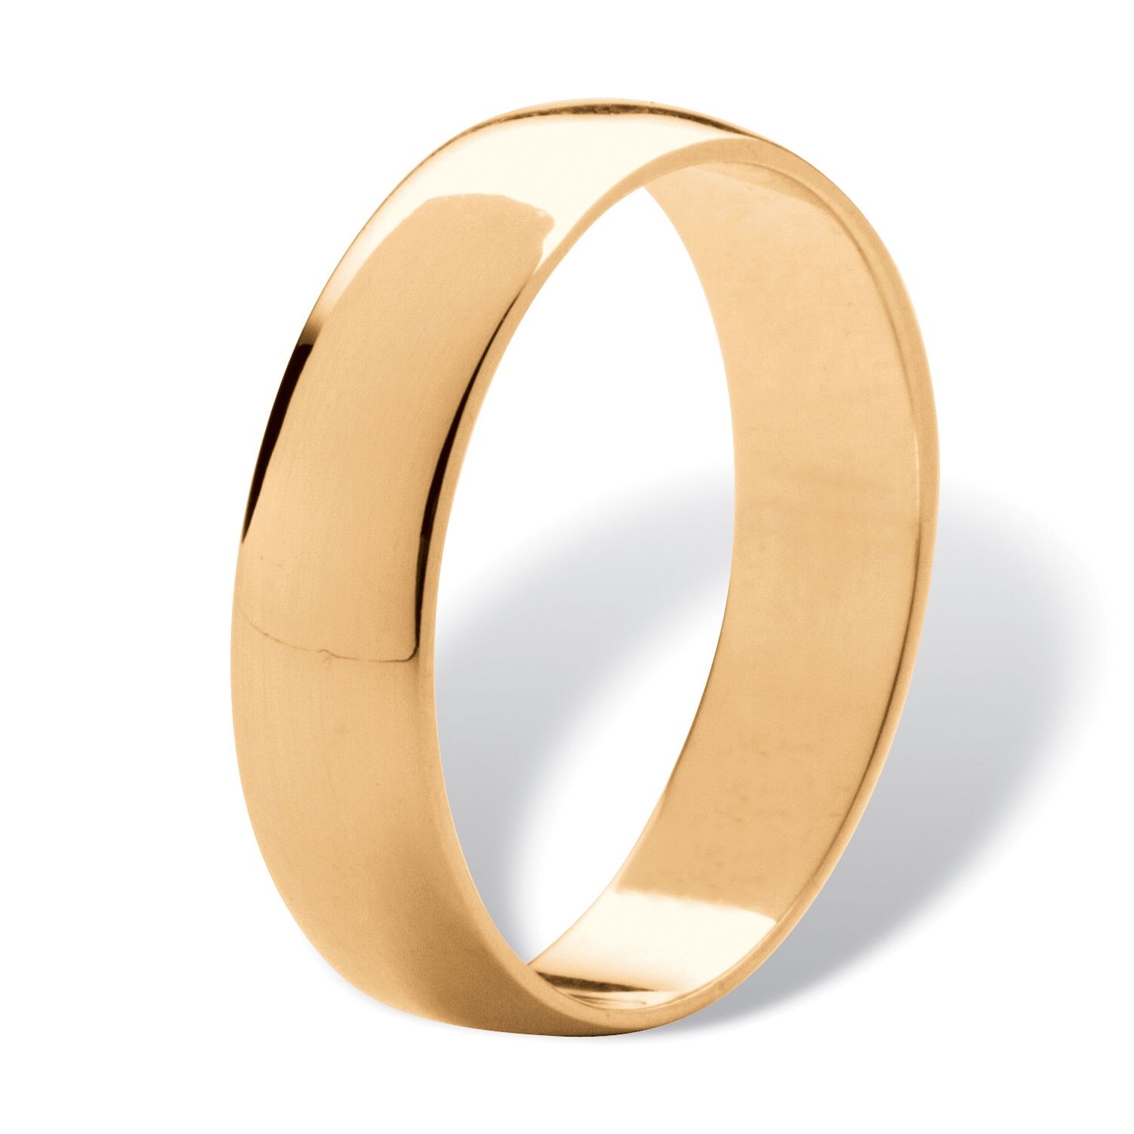 Polished Wedding Band in 14k Gold Plated Sterling Silver (5mm) - Image 2 of 5